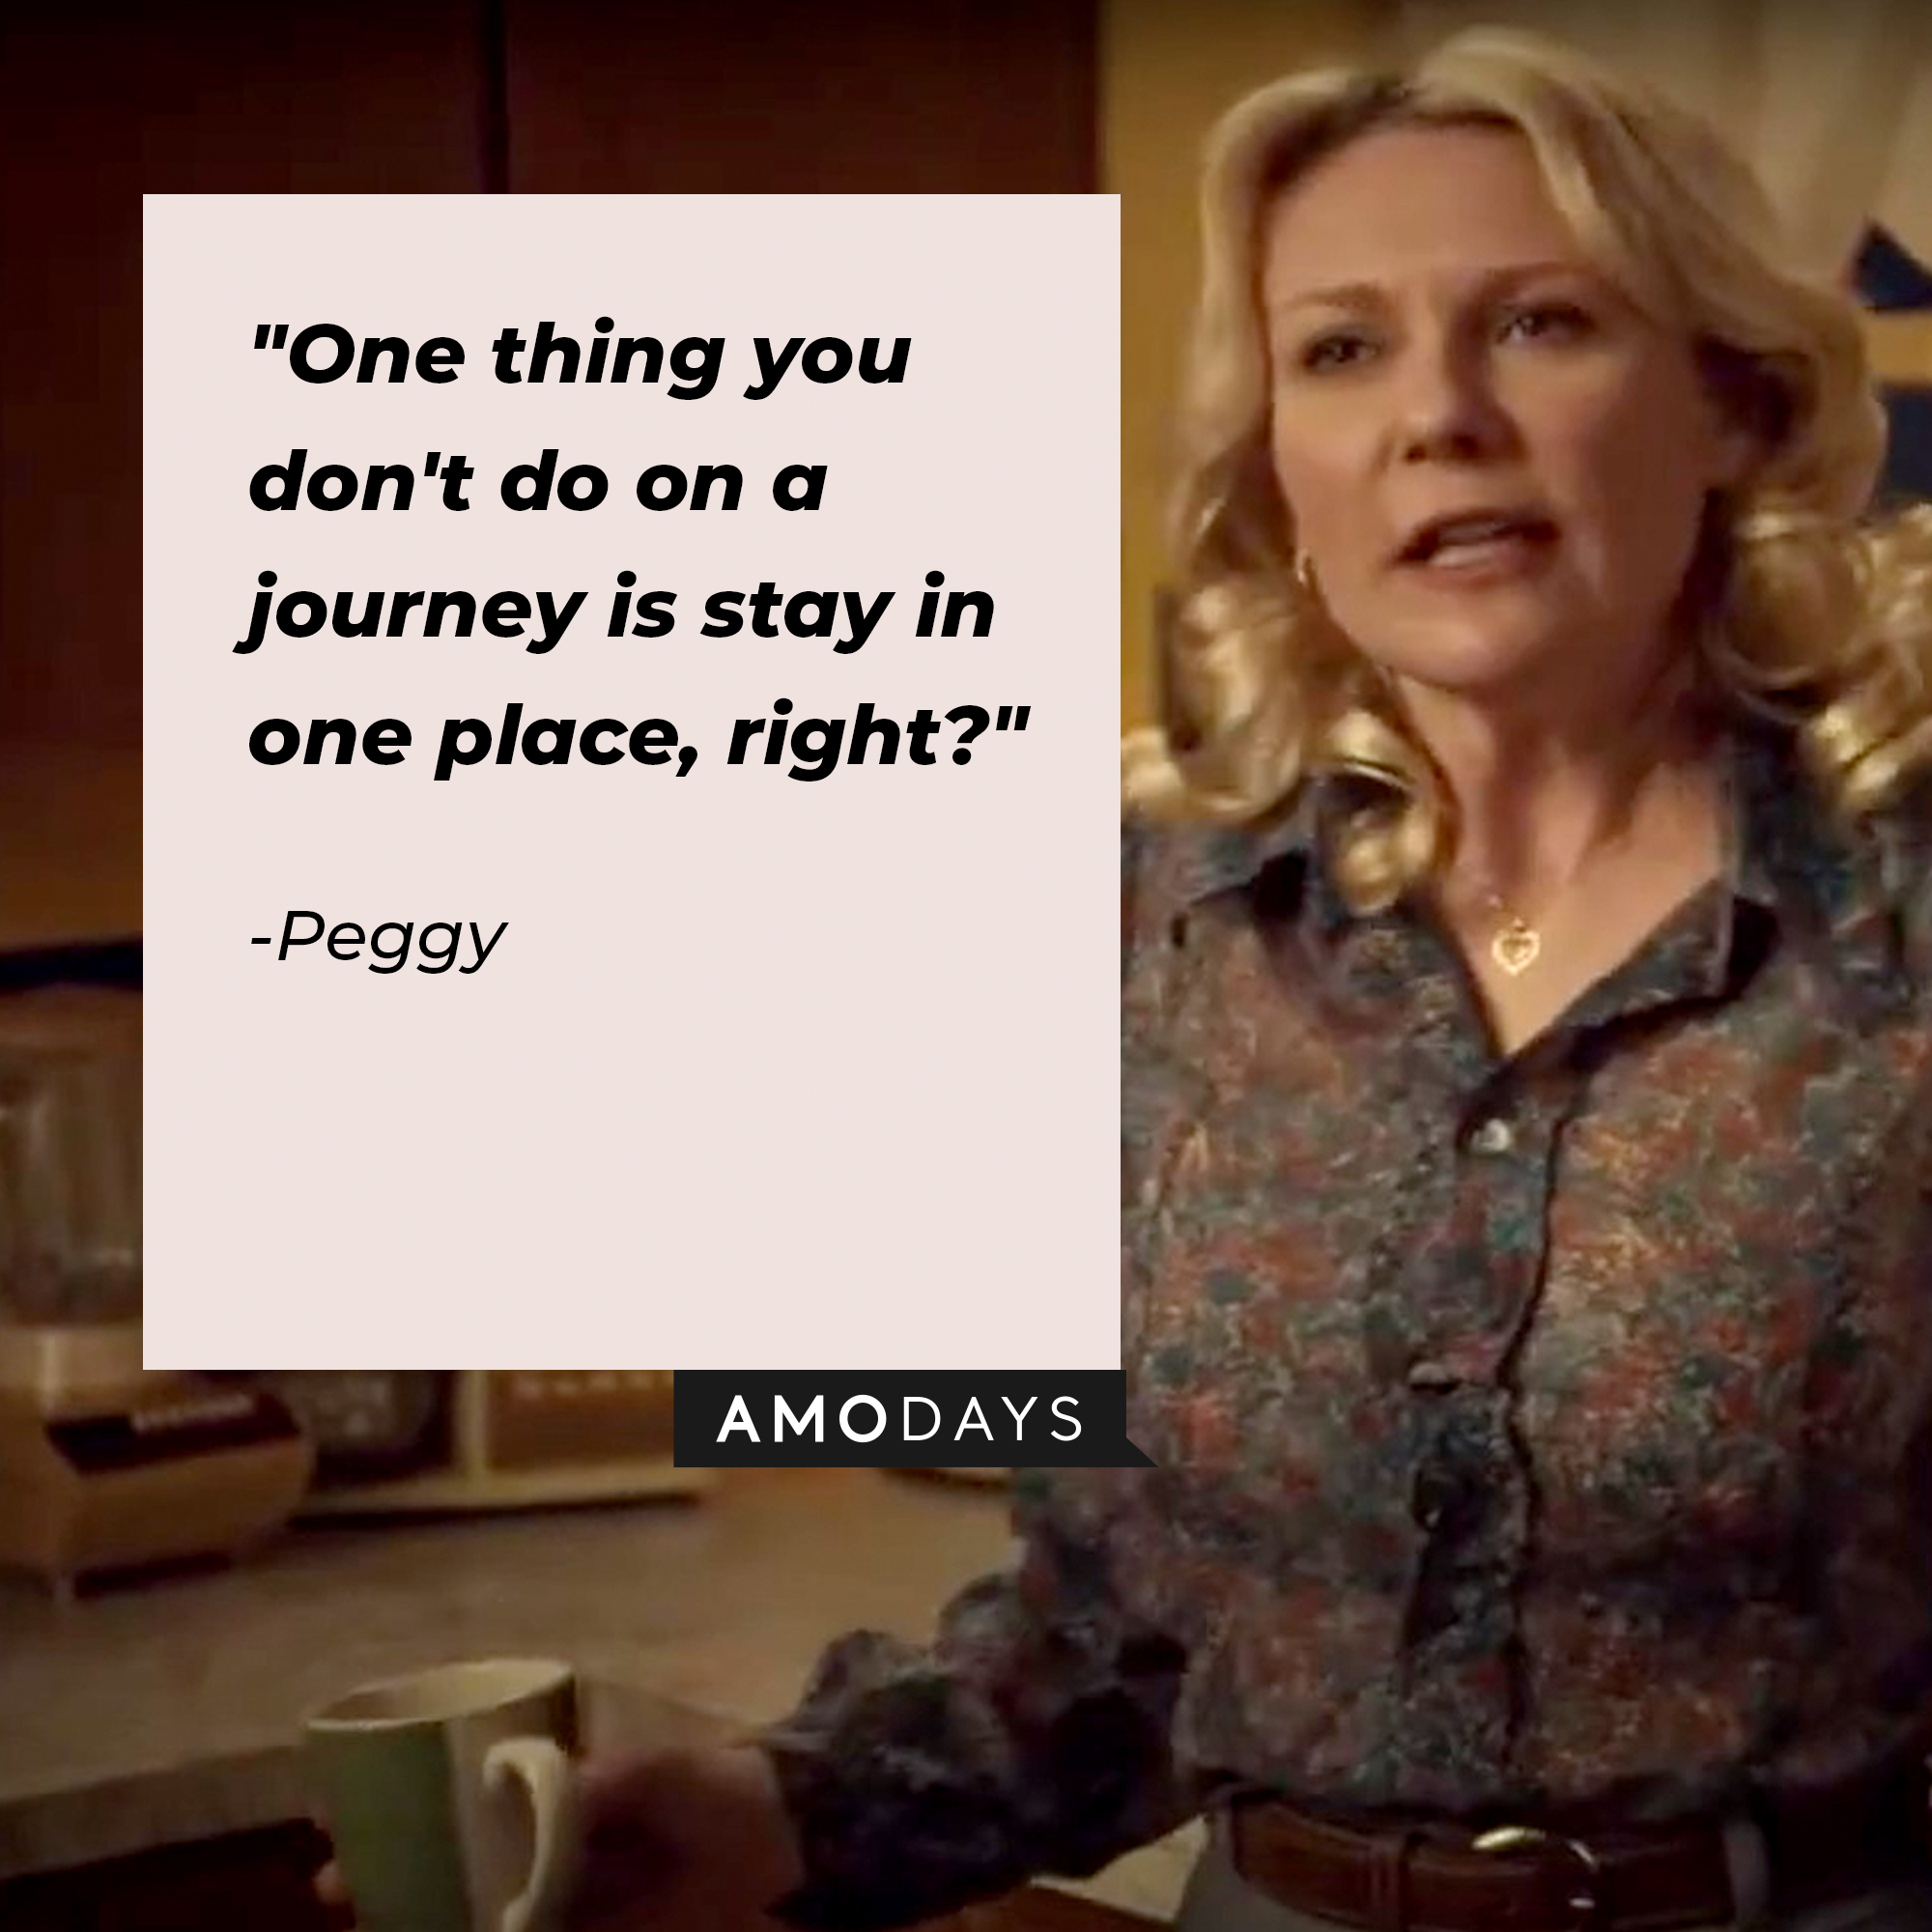 Peggy with her quote: “One thing you don't do on a journey is stay in one place, right?”| Source:  youtube.com/Netflix